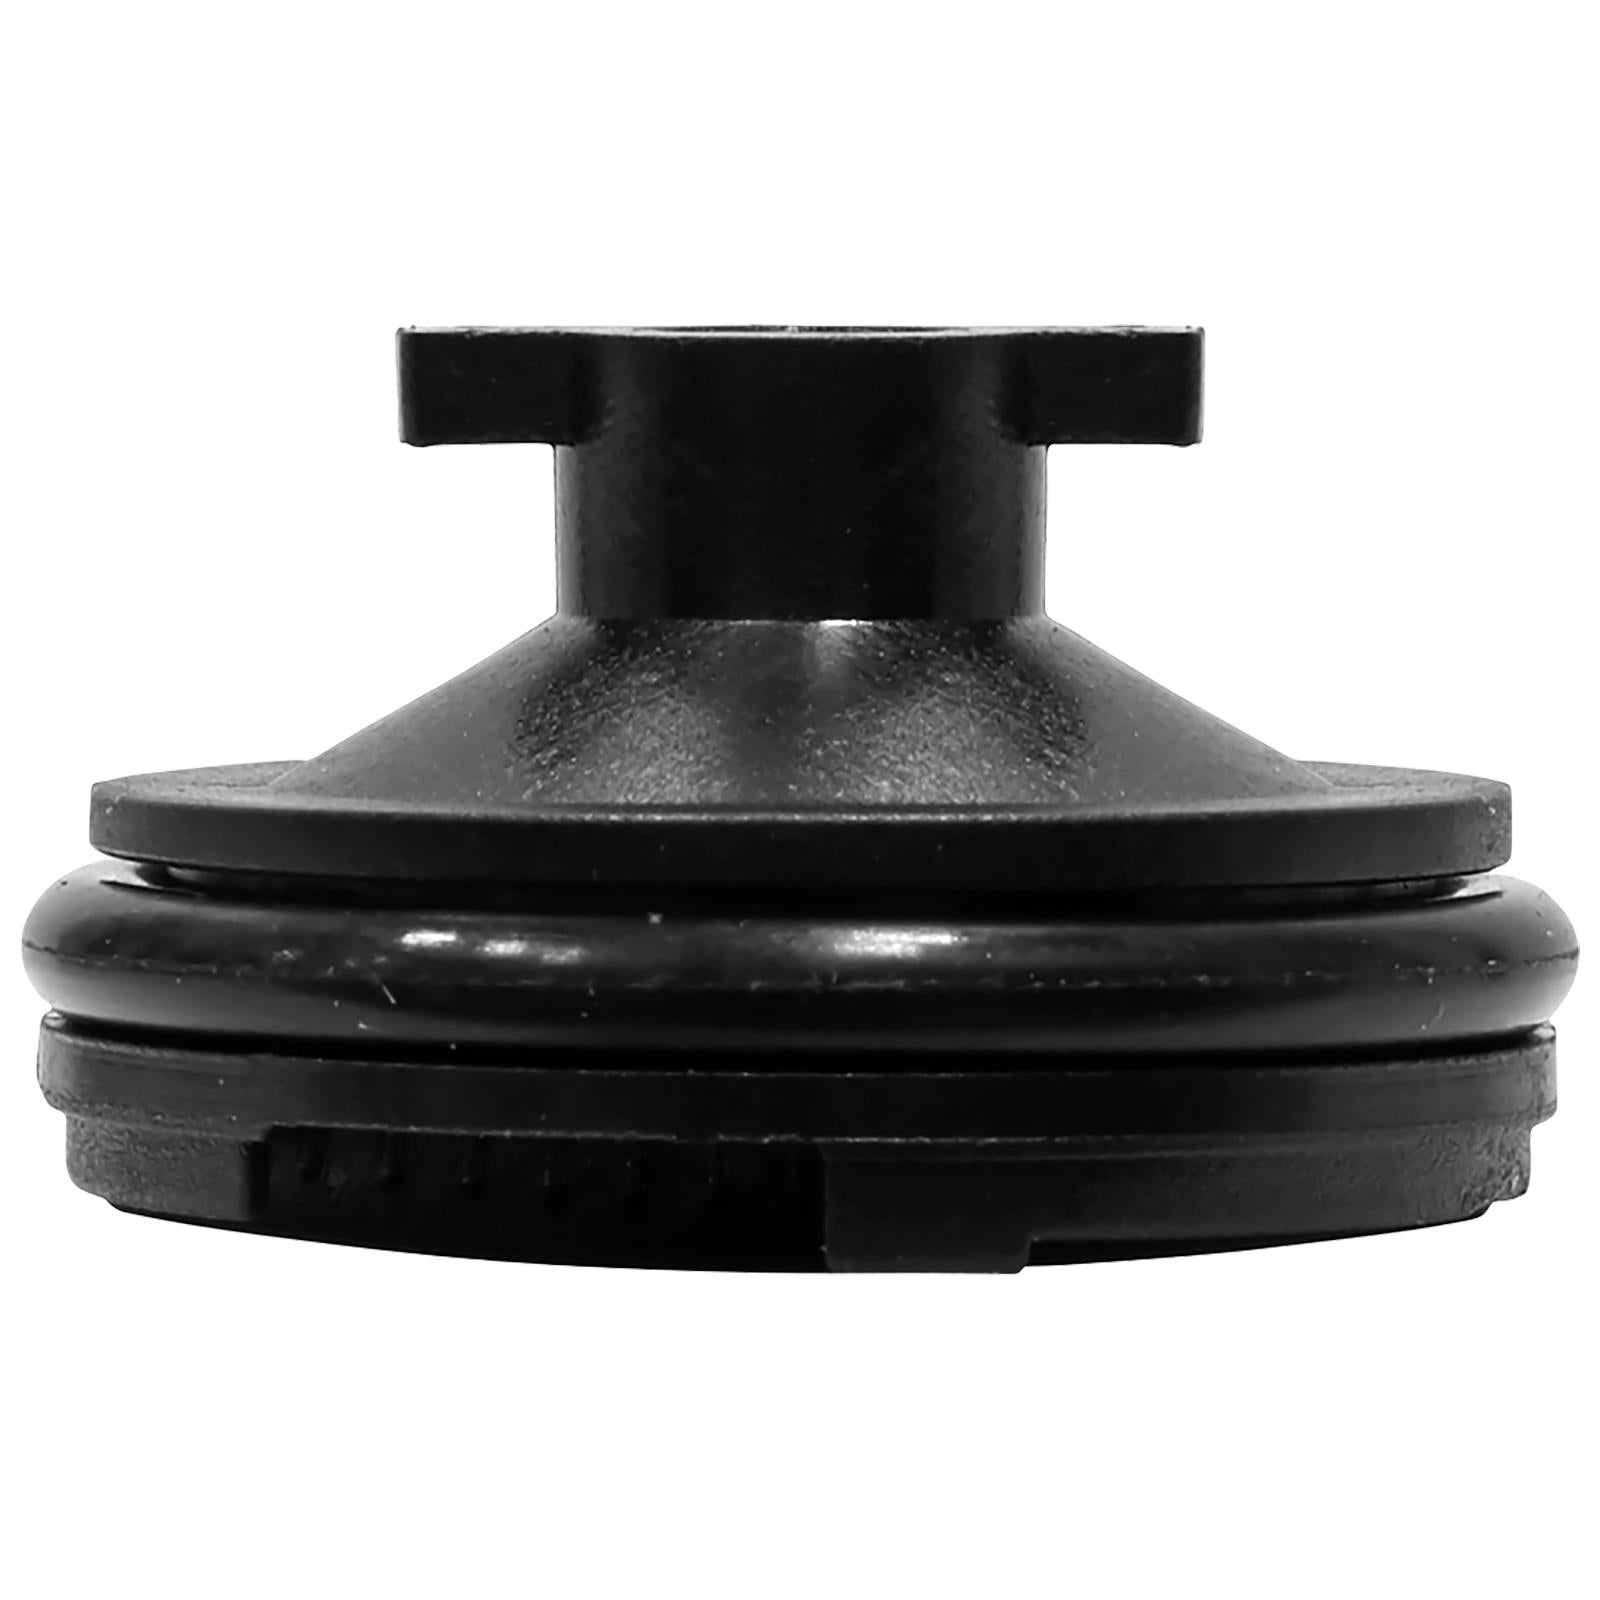 Sealey Plastic Sump Plug For Ford PSA (Ford PN 1871598 PSA PN 9801444780)